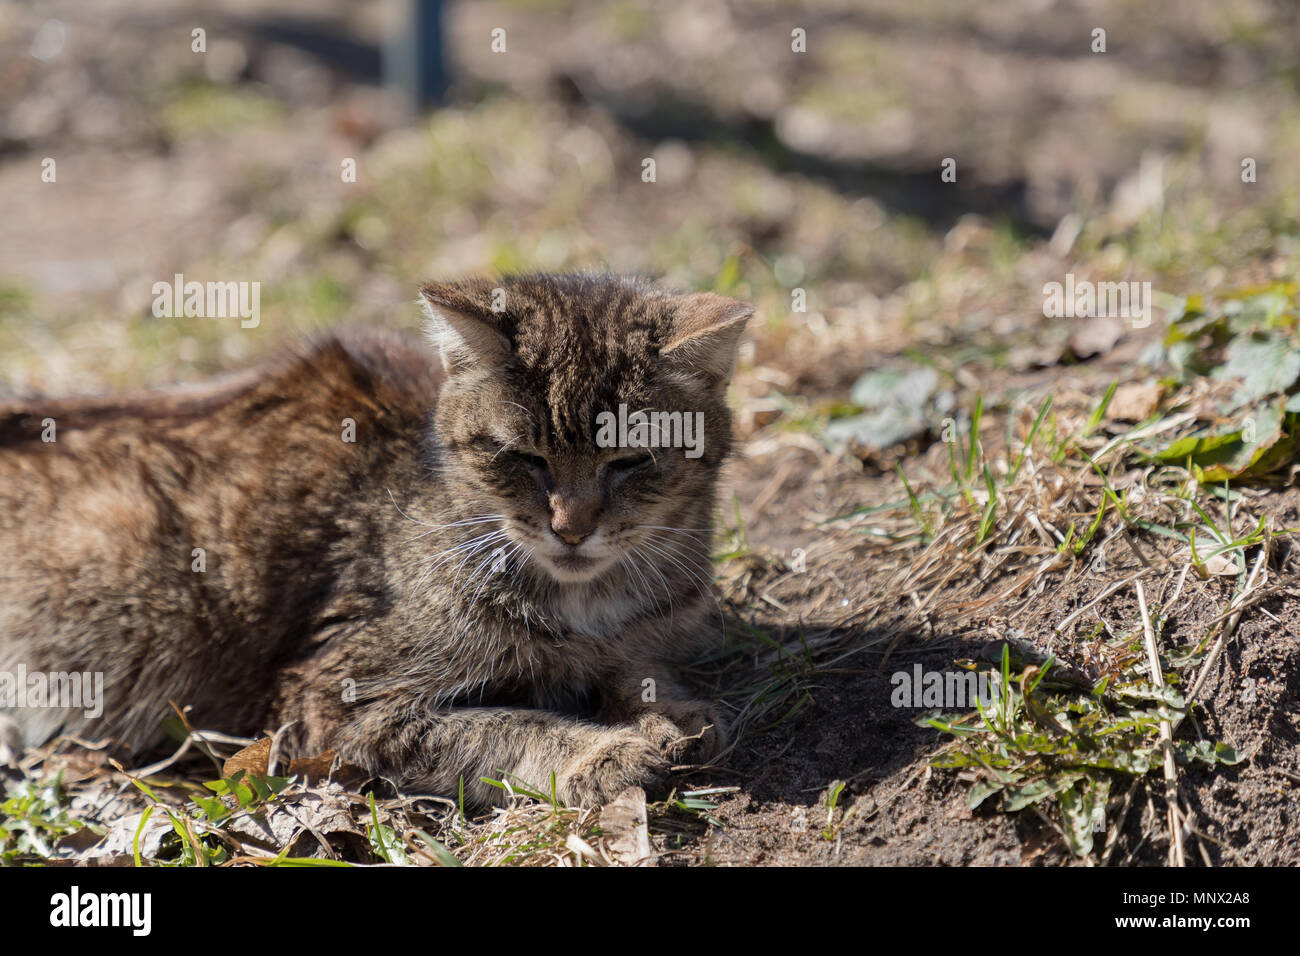 cat lying on the ground is heated in the sun and disguised as a landscape Stock Photo